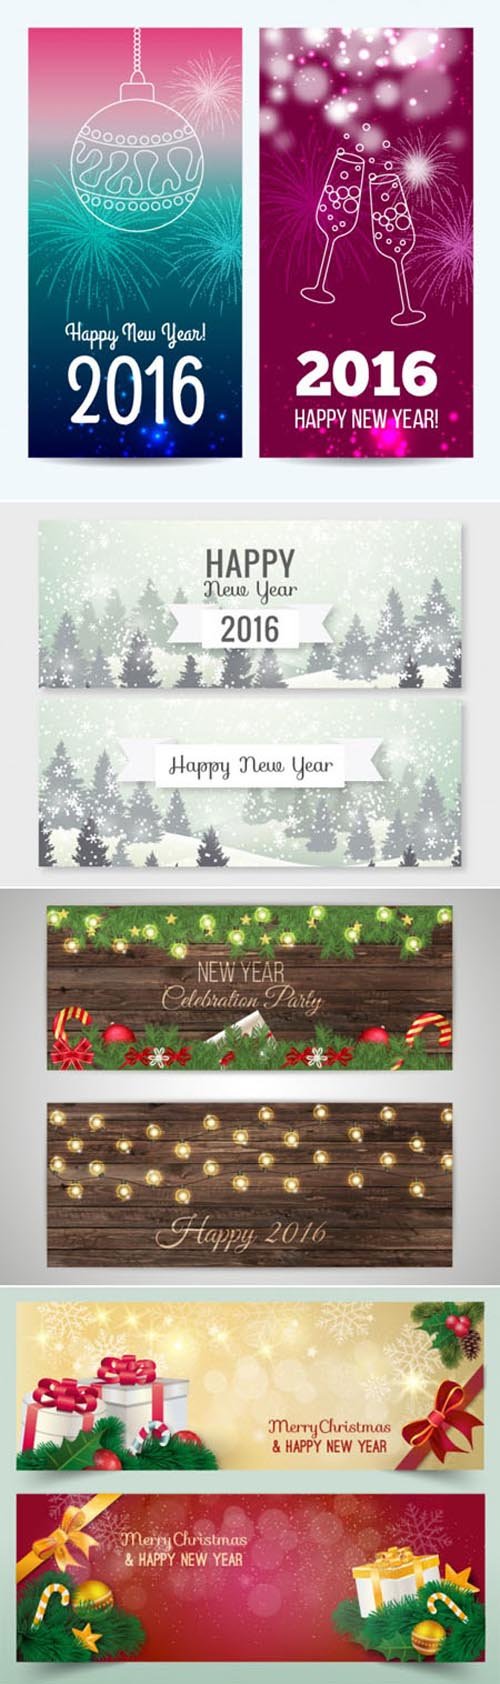 Happy New Year 2016 Banners in Vector [Vol.3]